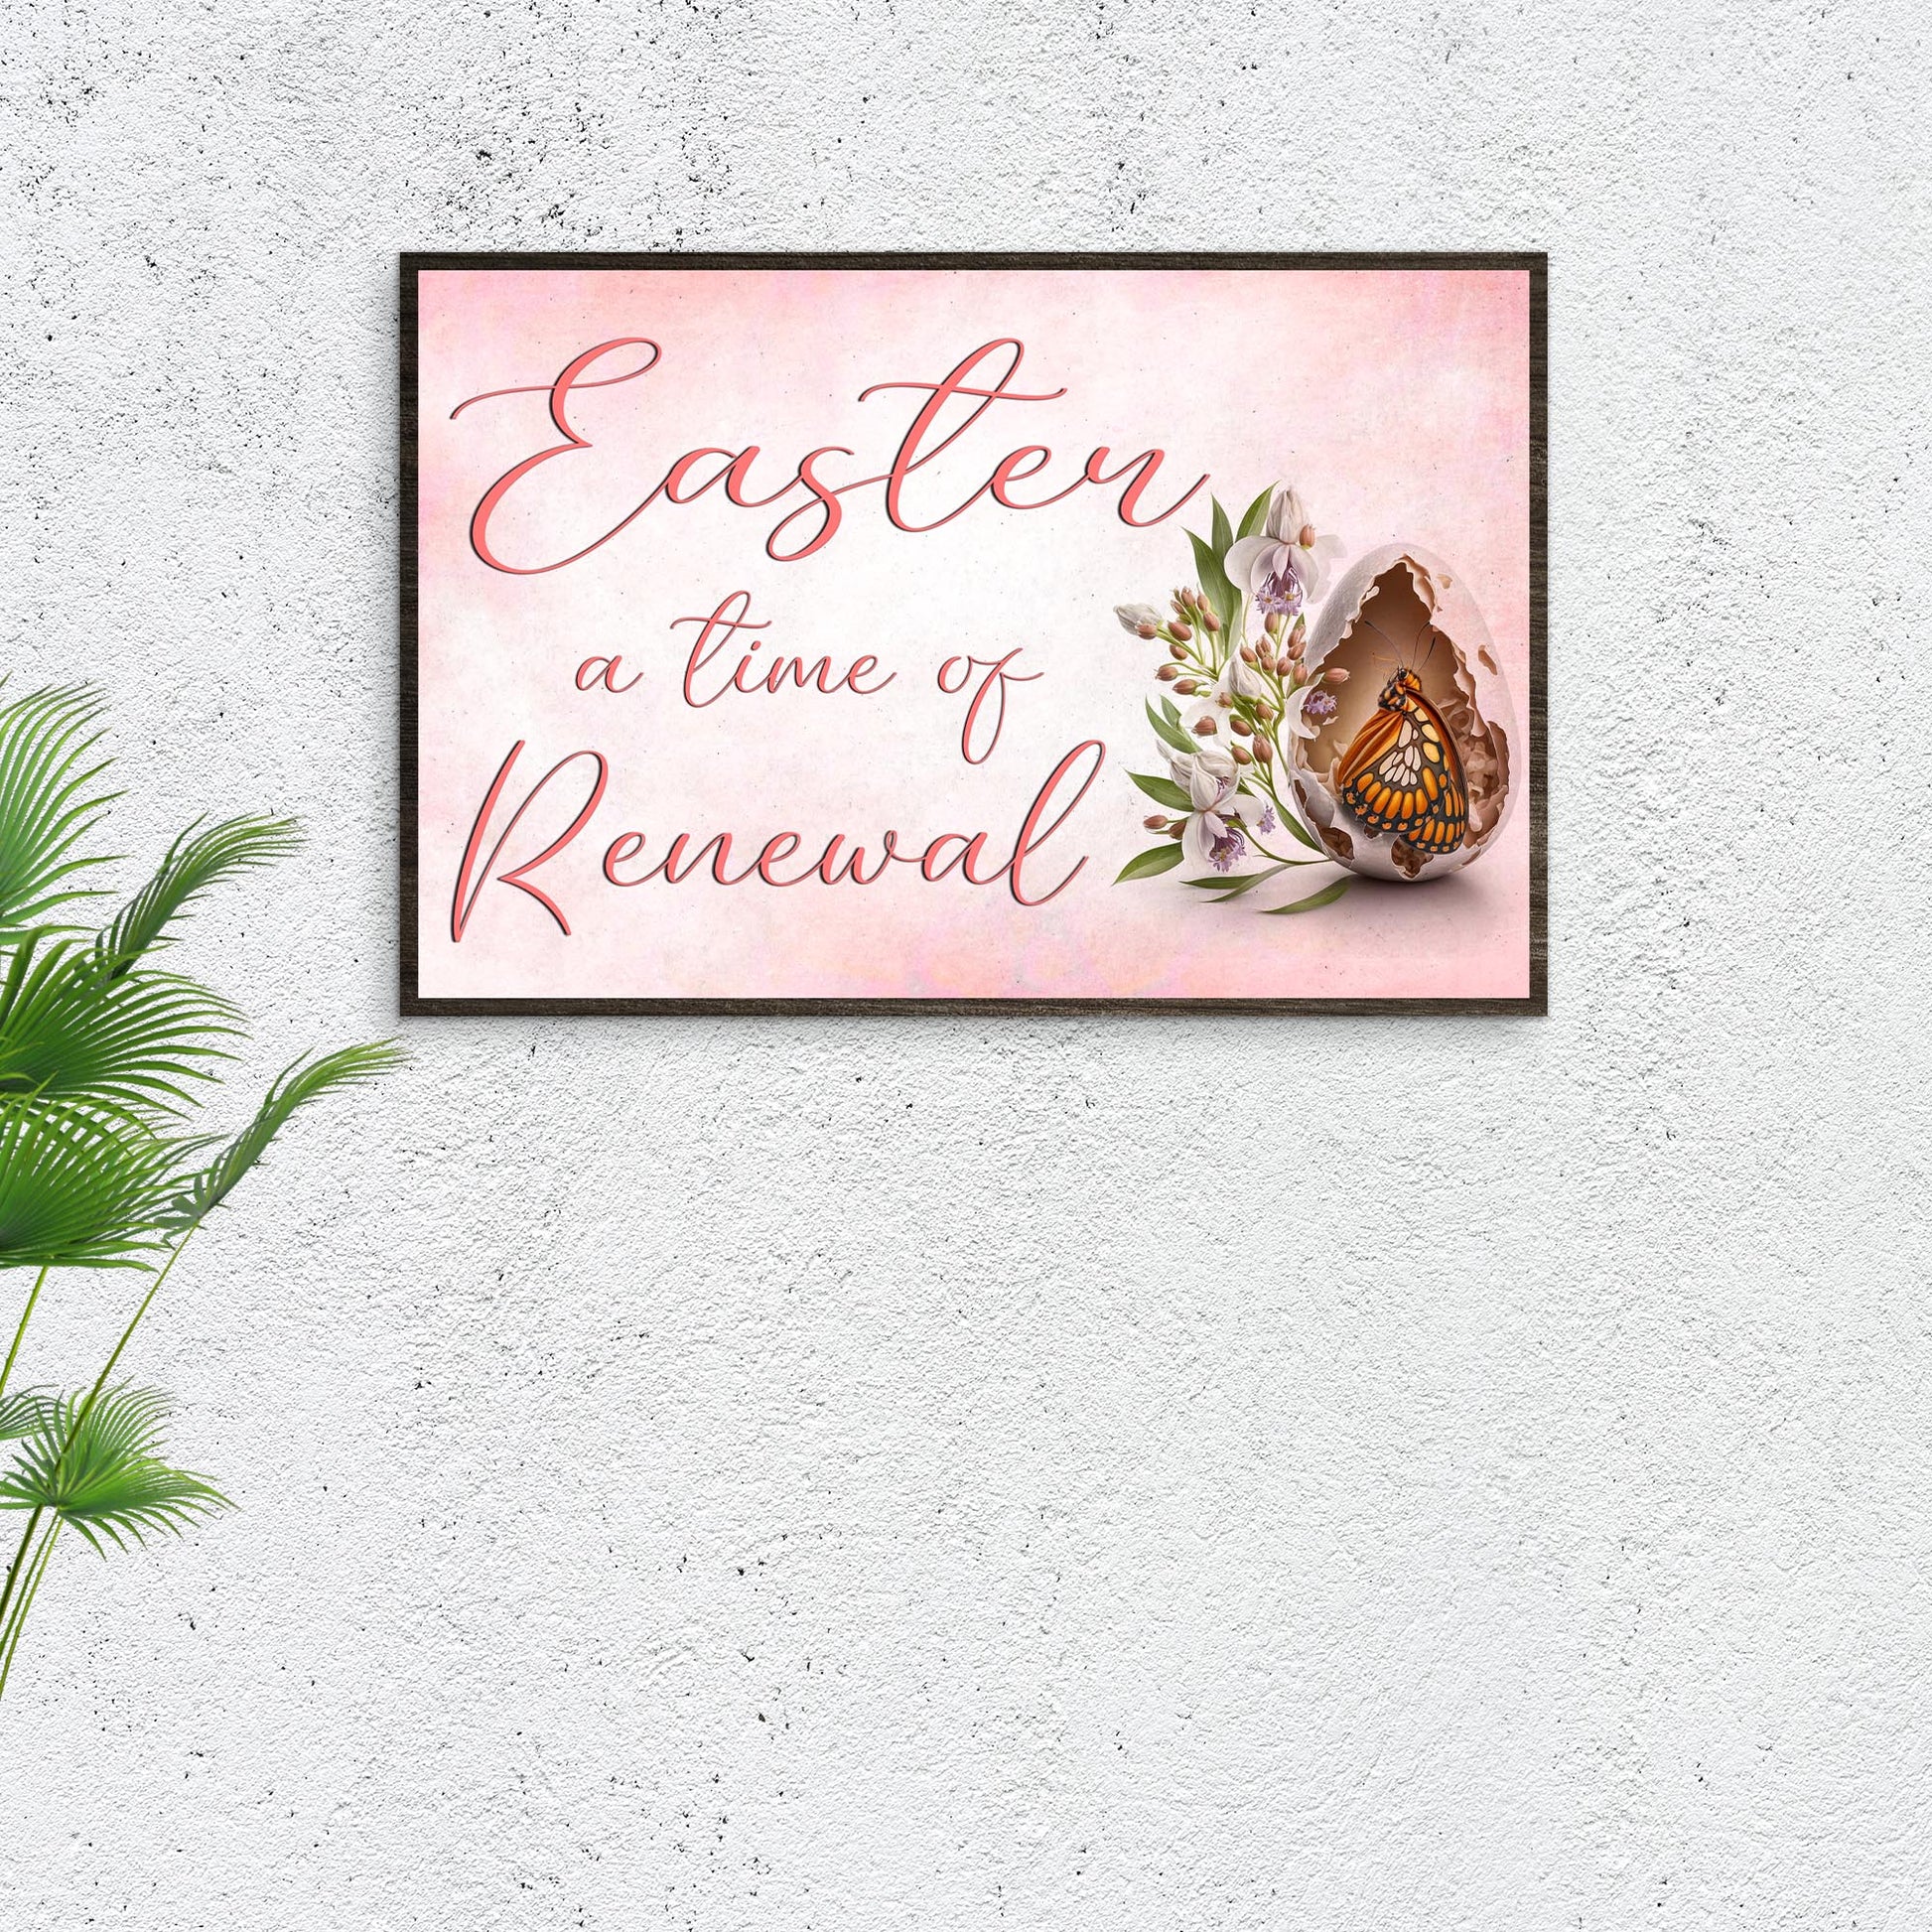 A Time Of Renewal Sign Style 1 - Image by Tailored Canvases